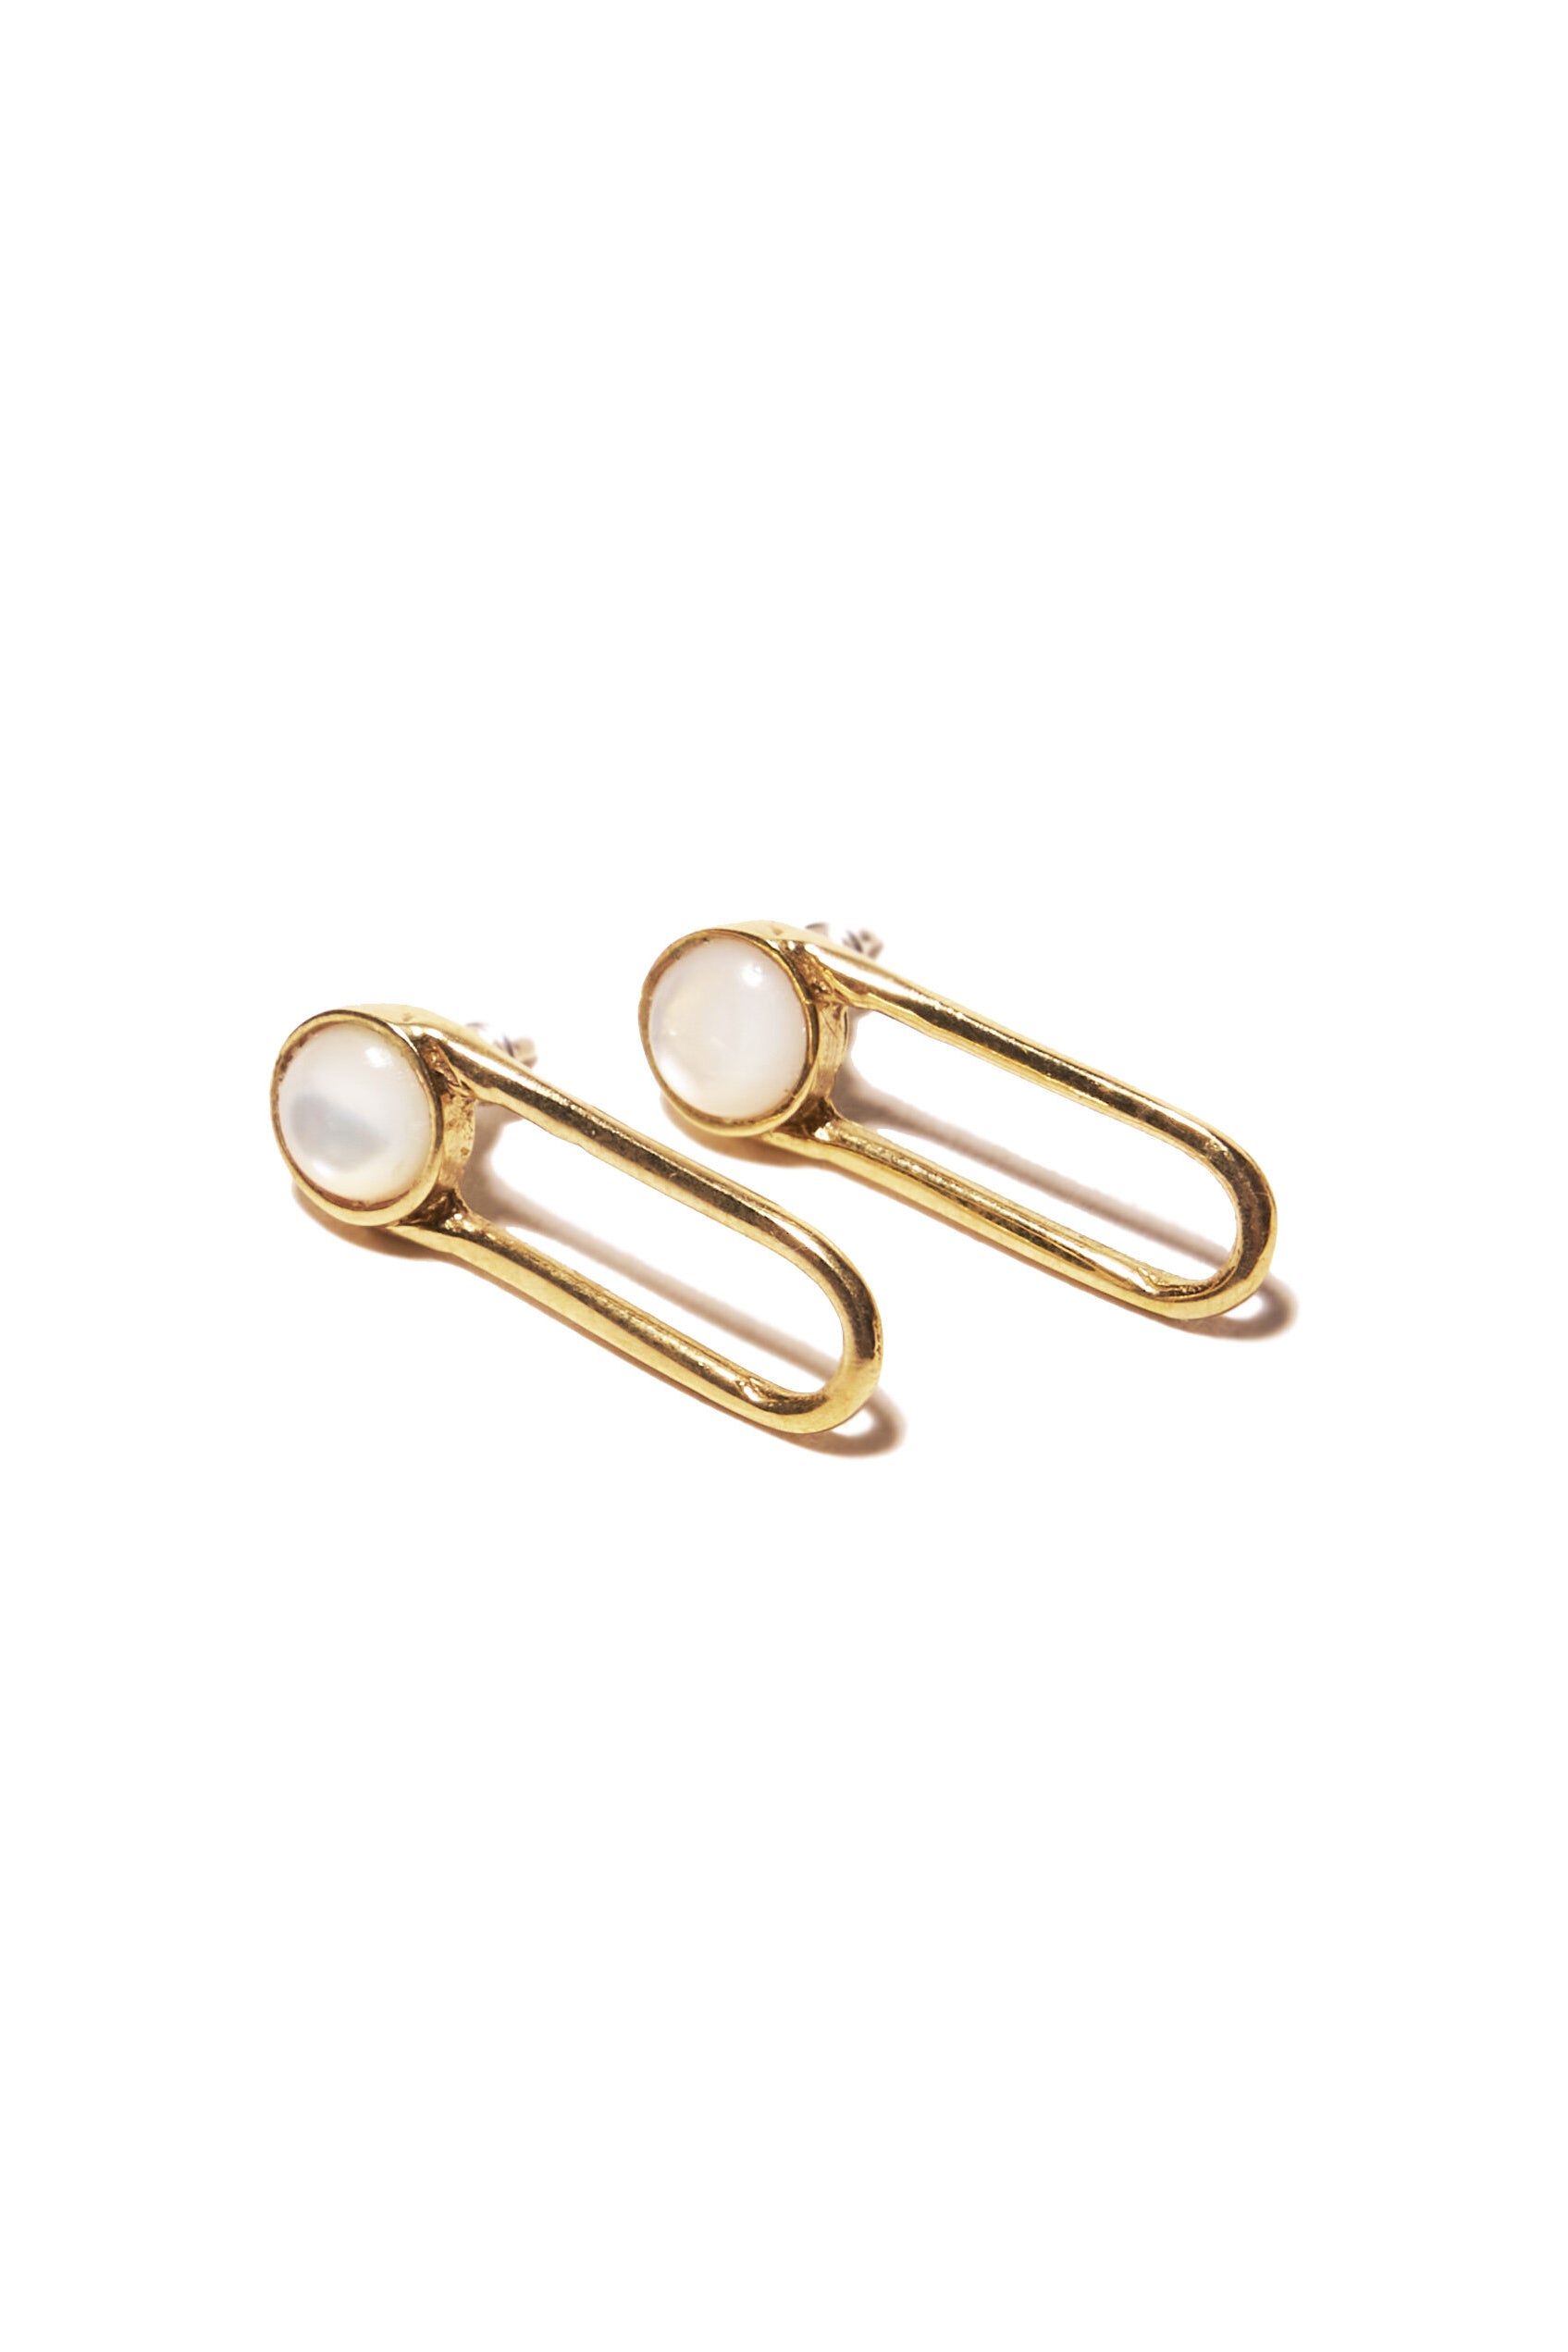 ODETTE_NY_Aura_Mother_of_Pearl_Stud_Earrings_with_Brass_Mini_Drop_Handmade_in_USA